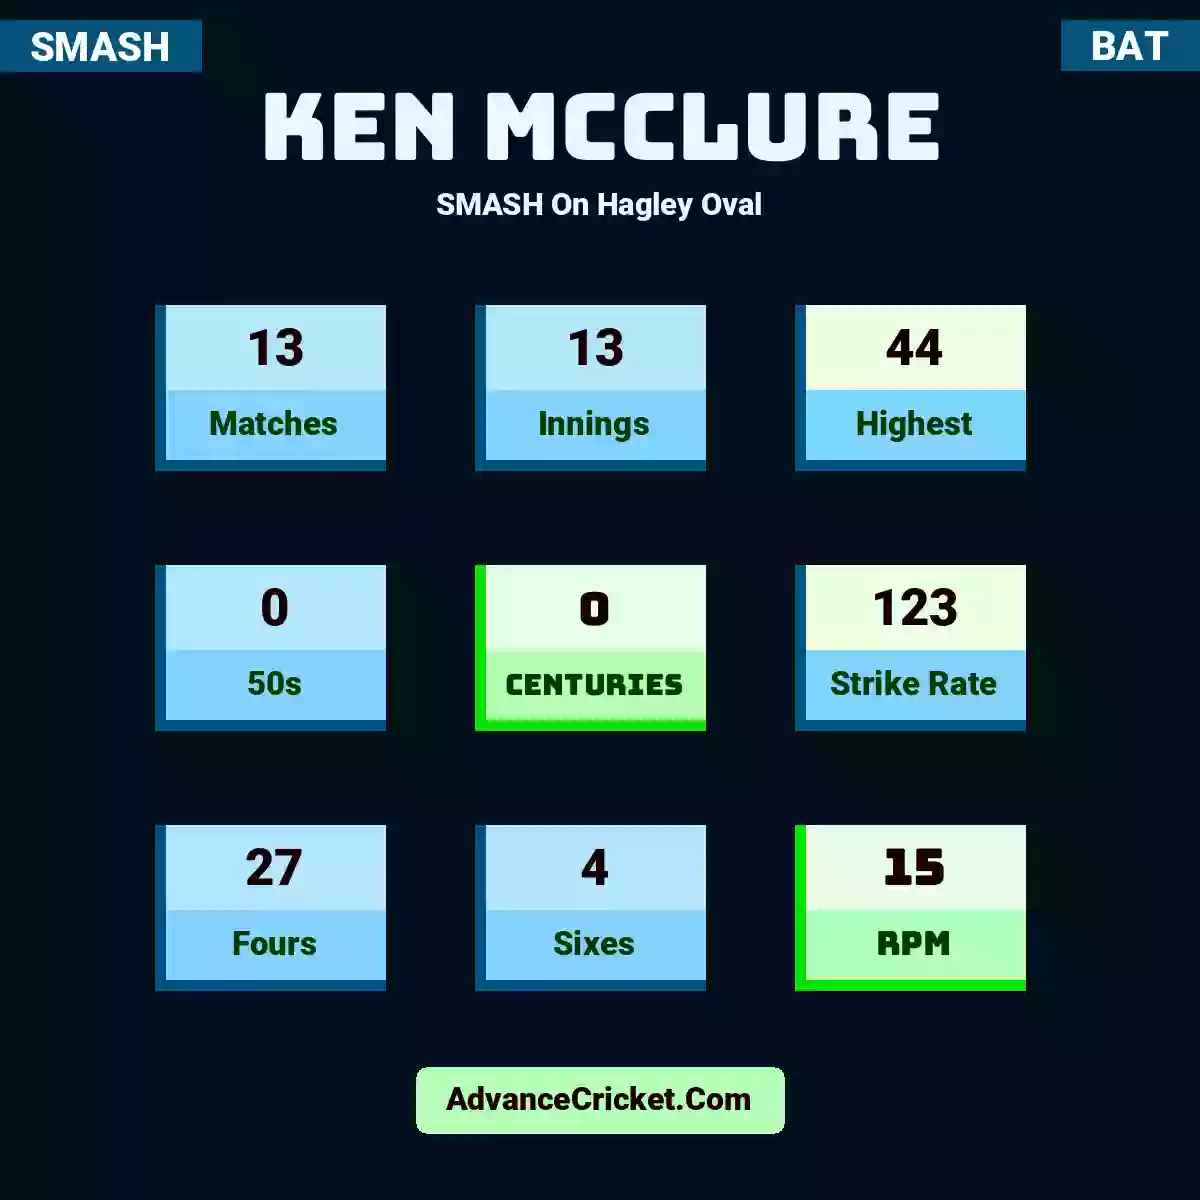 Ken McClure SMASH  On Hagley Oval, Ken McClure played 13 matches, scored 44 runs as highest, 0 half-centuries, and 0 centuries, with a strike rate of 123. K.McClure hit 27 fours and 4 sixes, with an RPM of 15.